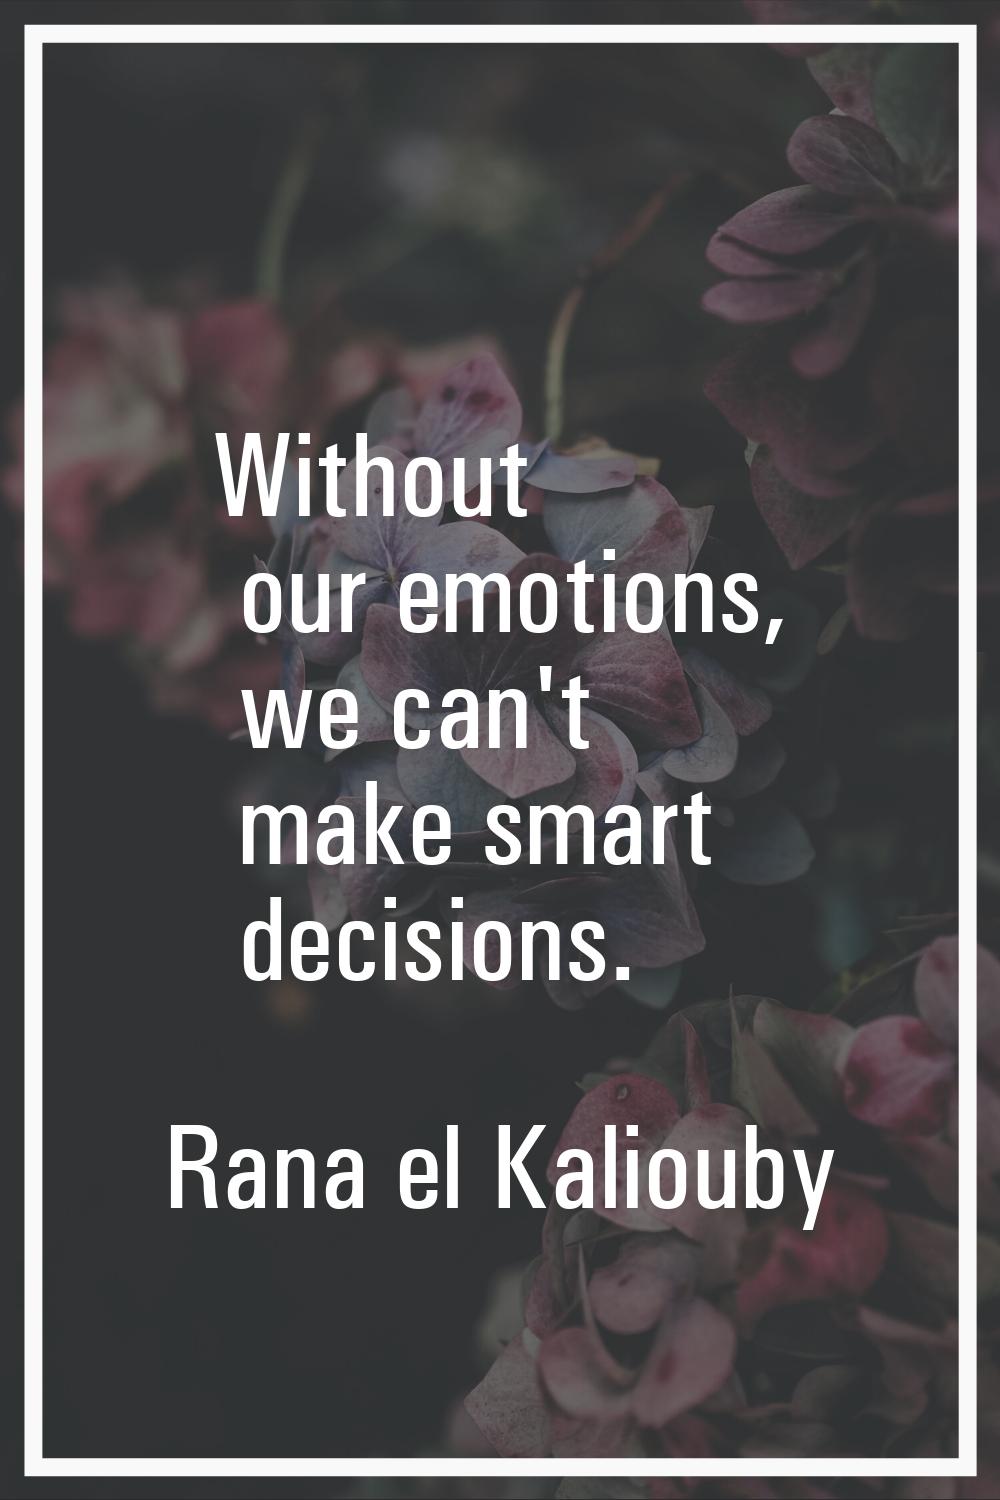 Without our emotions, we can't make smart decisions.